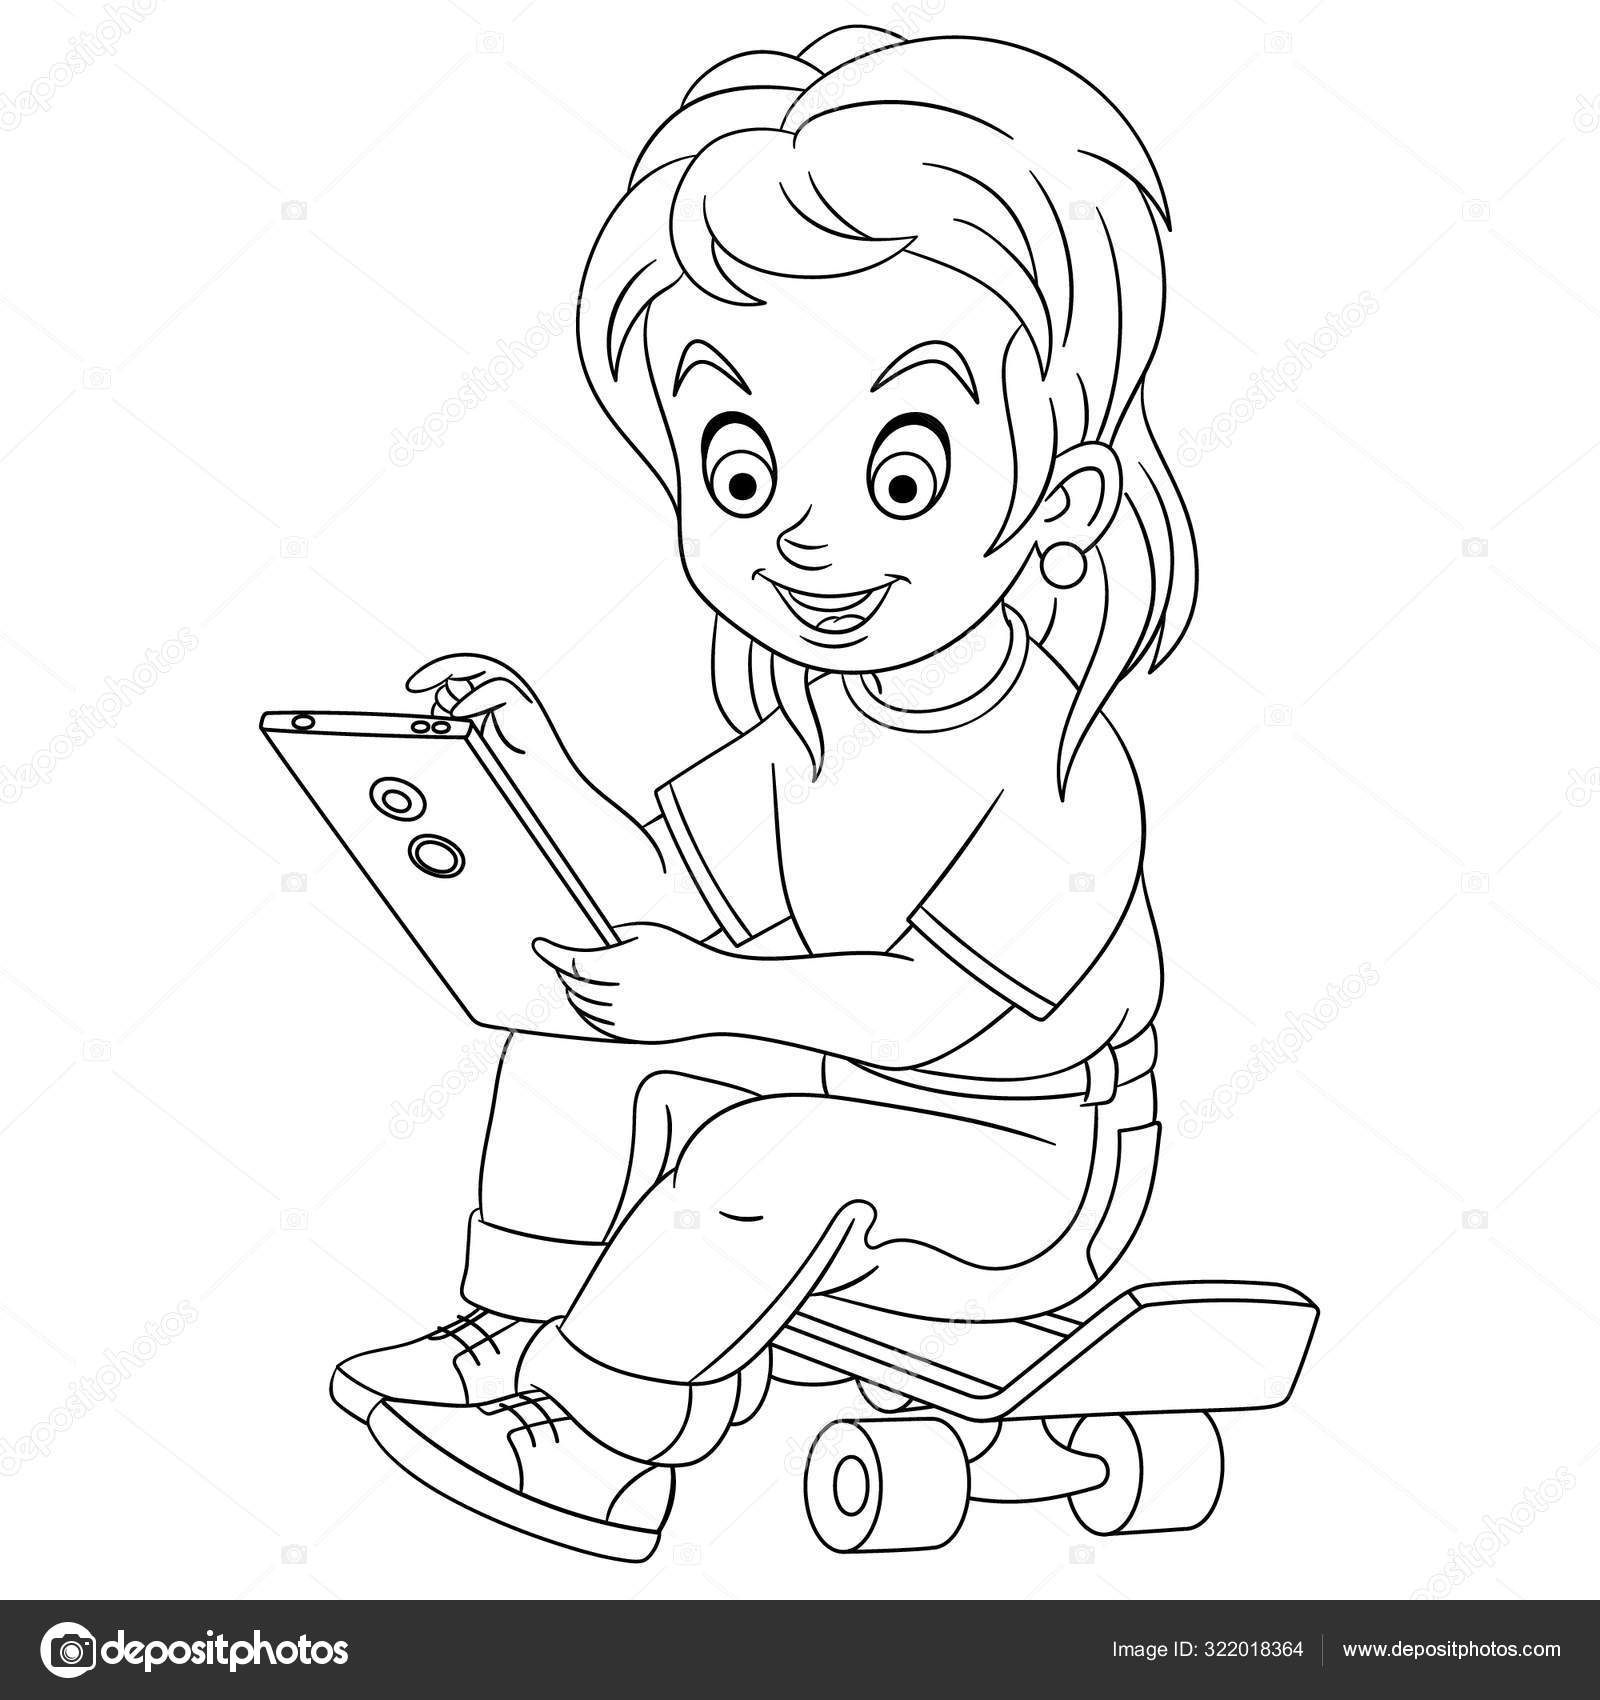 Coloring page with girl browsing tablet stock vector by sybirko